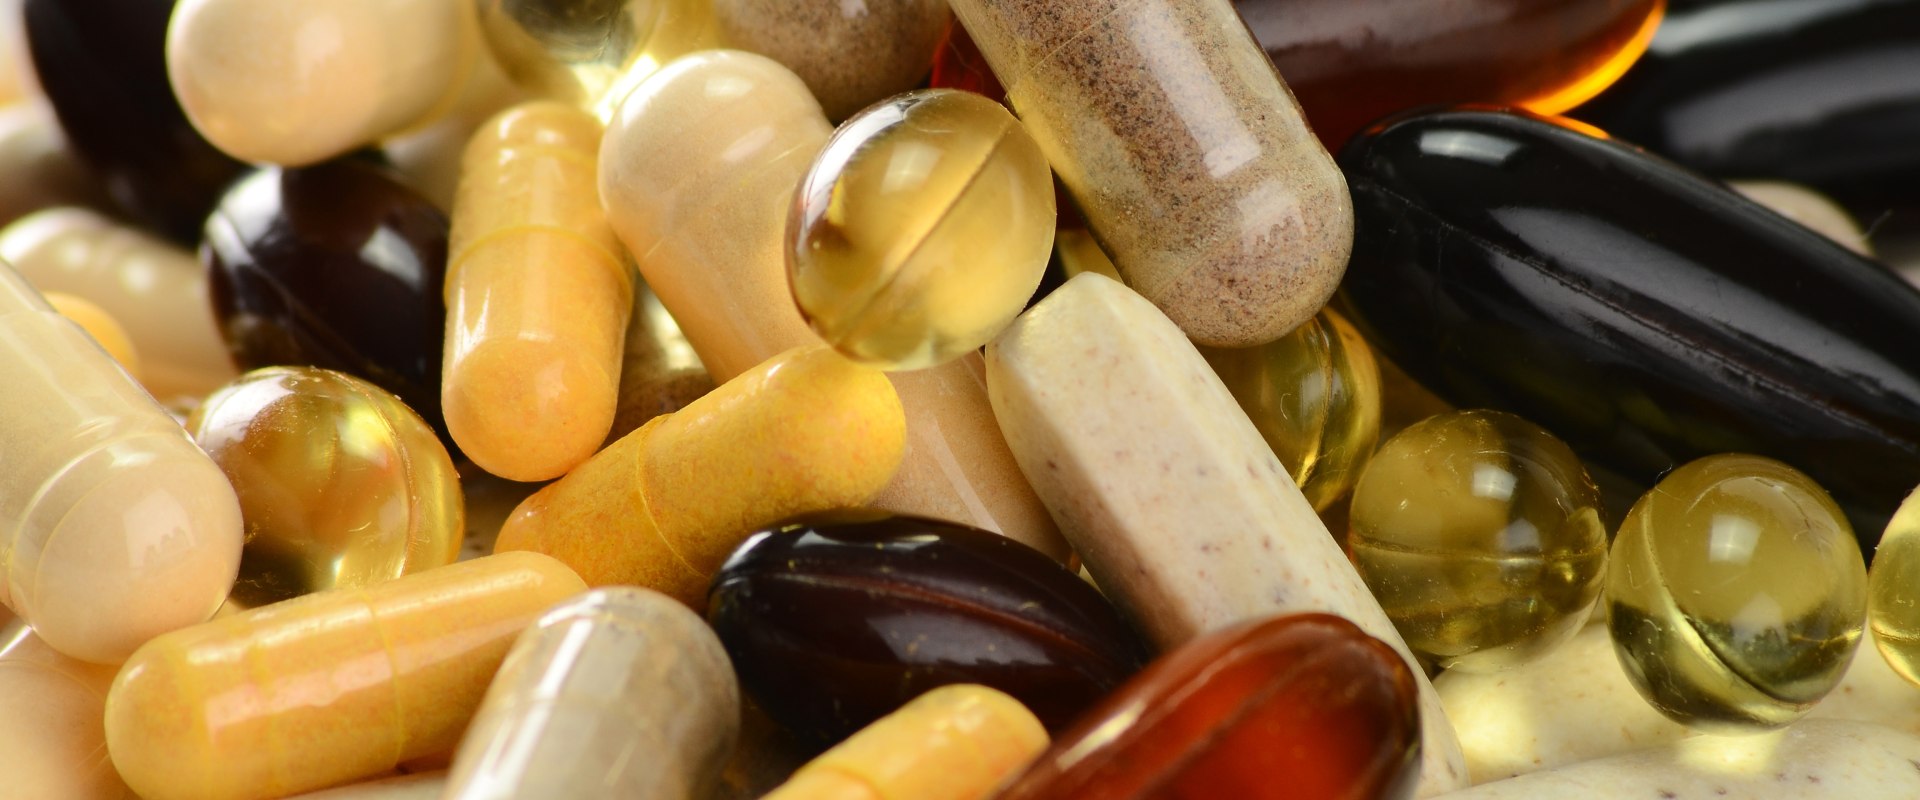 Are You Taking Too Many Supplements? A Guide to Supplement Safety